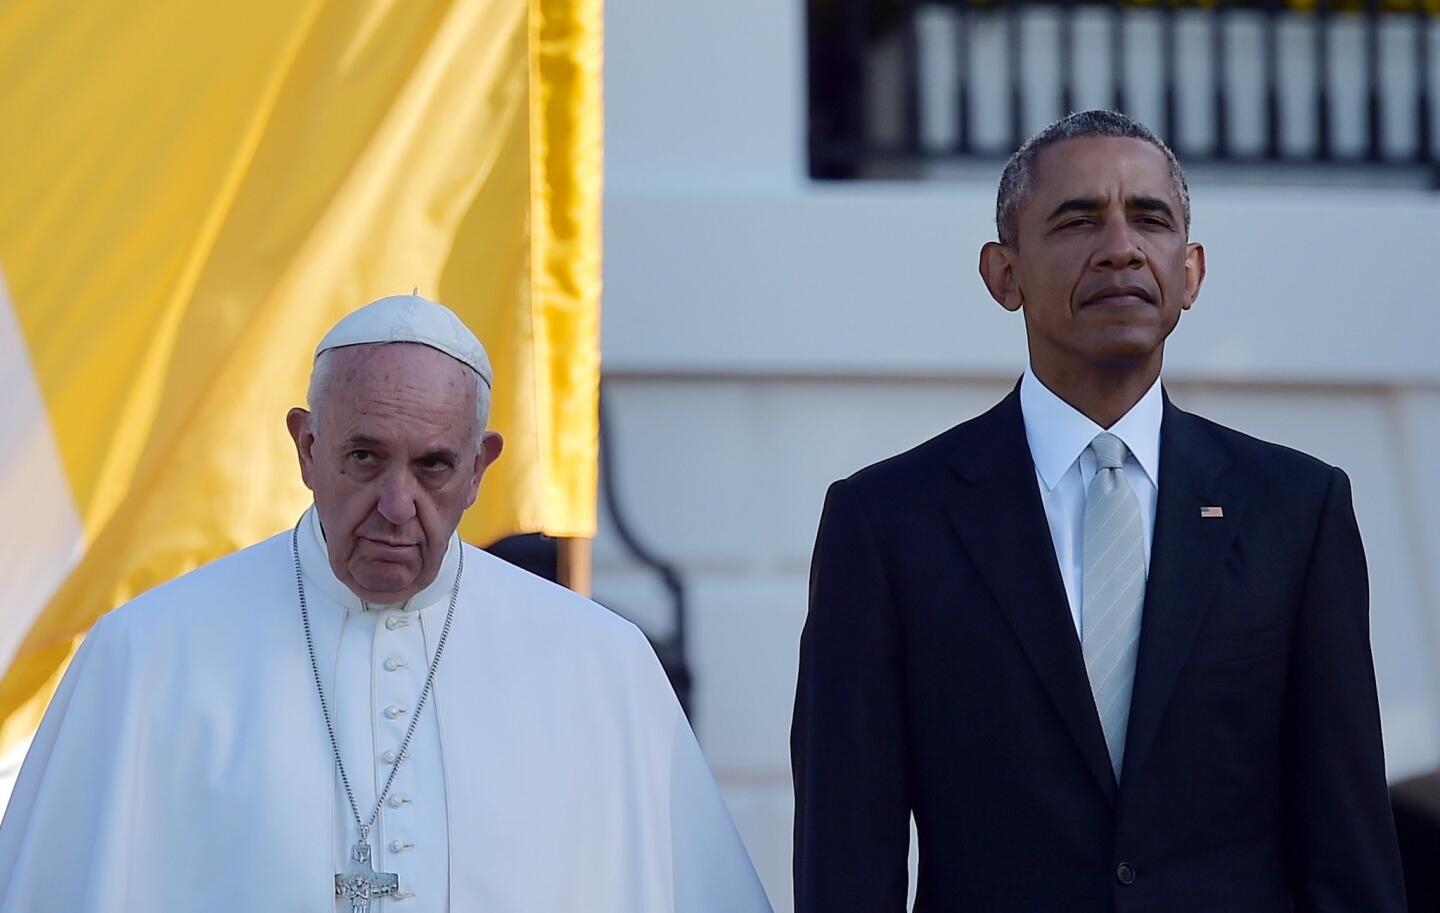 President Barack Obama welcomes Pope Francis to the White House on Sept. 23, 2015.